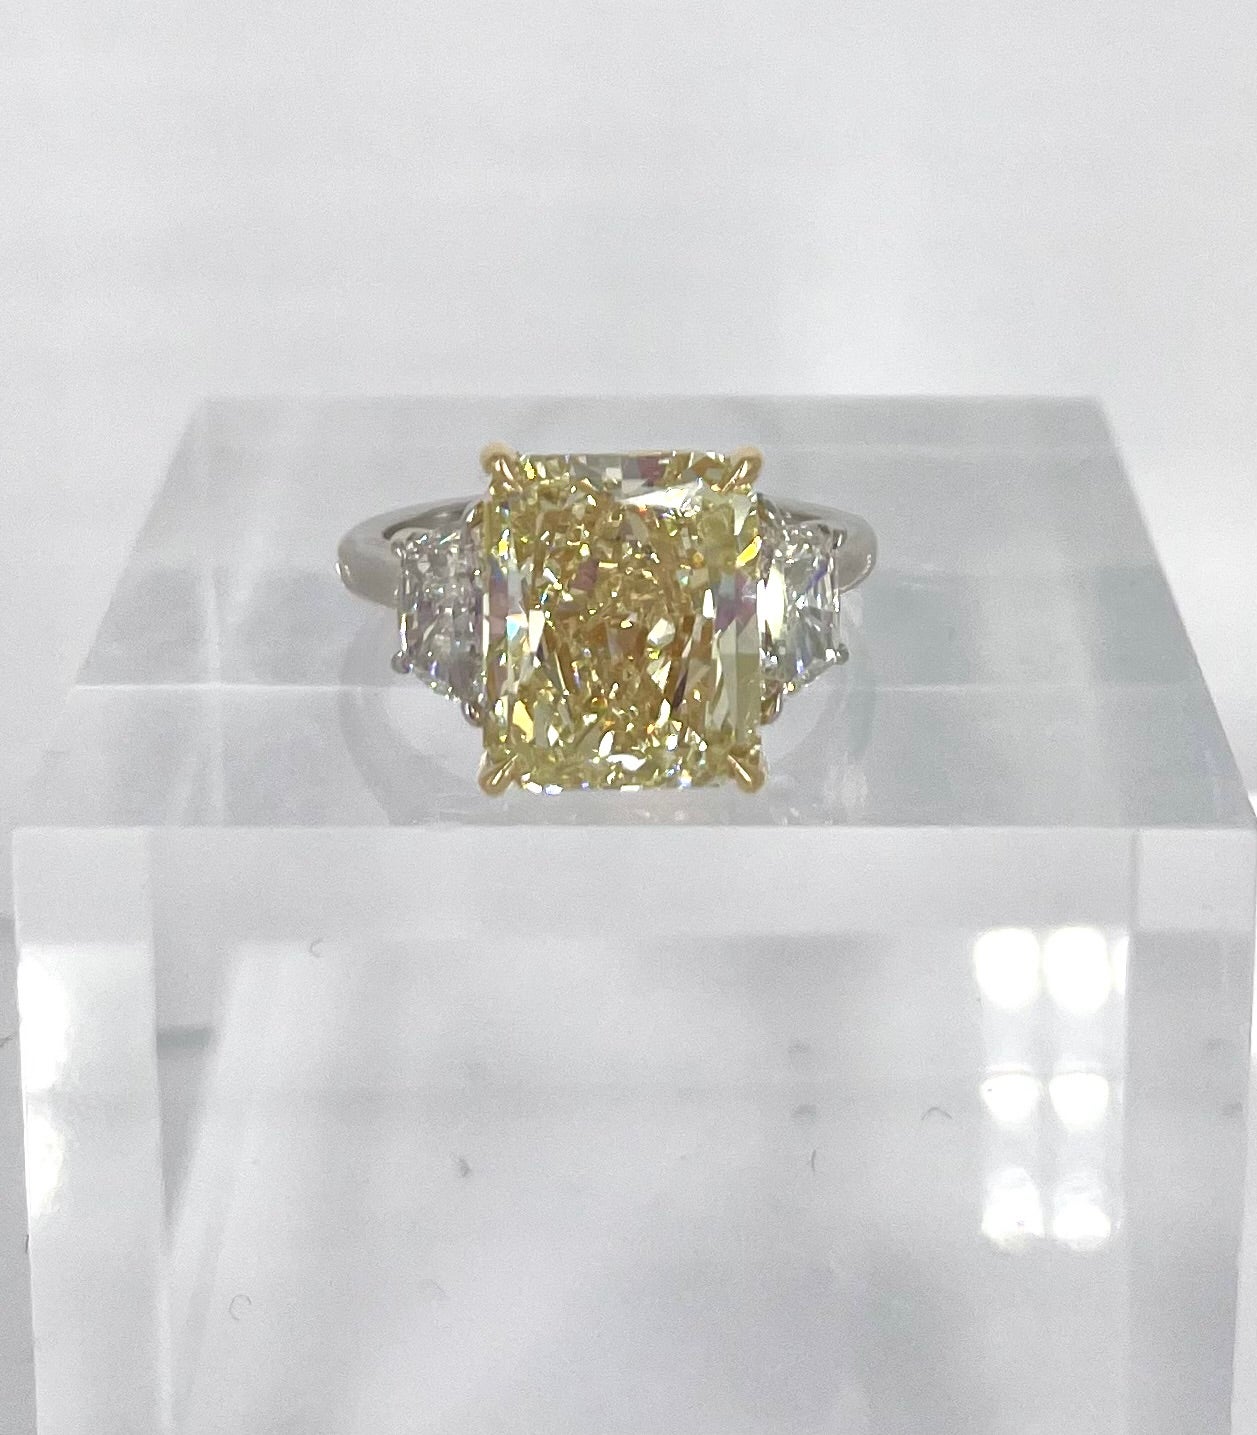 This fancy light yellow diamond three stone engagement ring is a showstopper! The yellow diamond gives new energy to the elegant and simple design. The center diamond is a 5.62 carat radiant, graded by GIA as Fancy Light Yellow and VS2 clarity. The